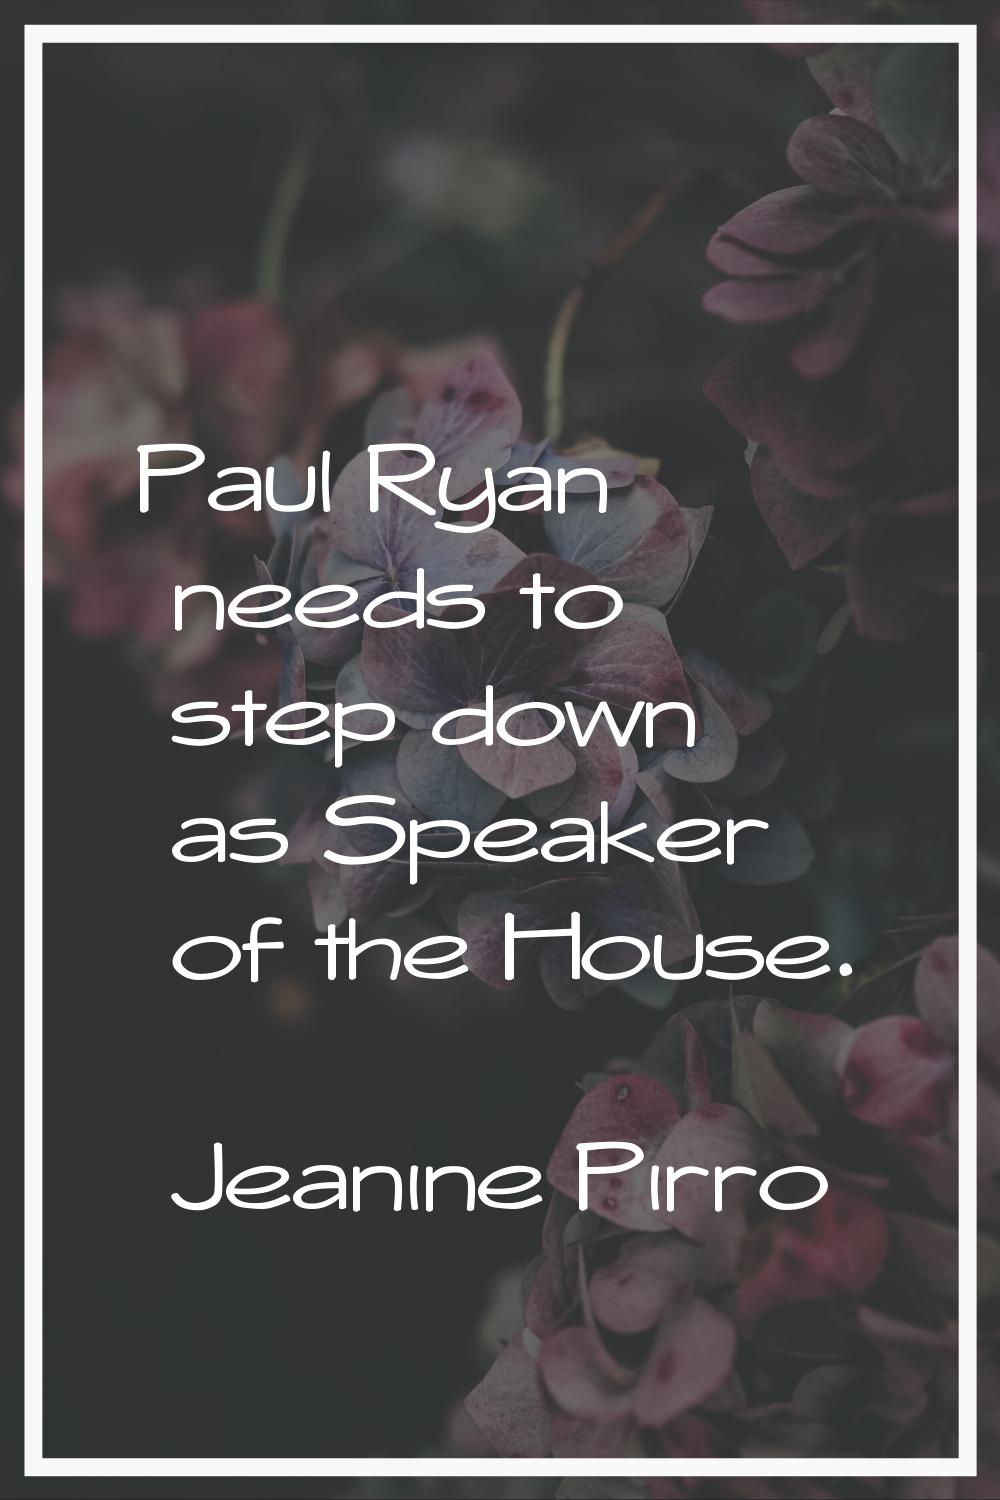 Paul Ryan needs to step down as Speaker of the House.